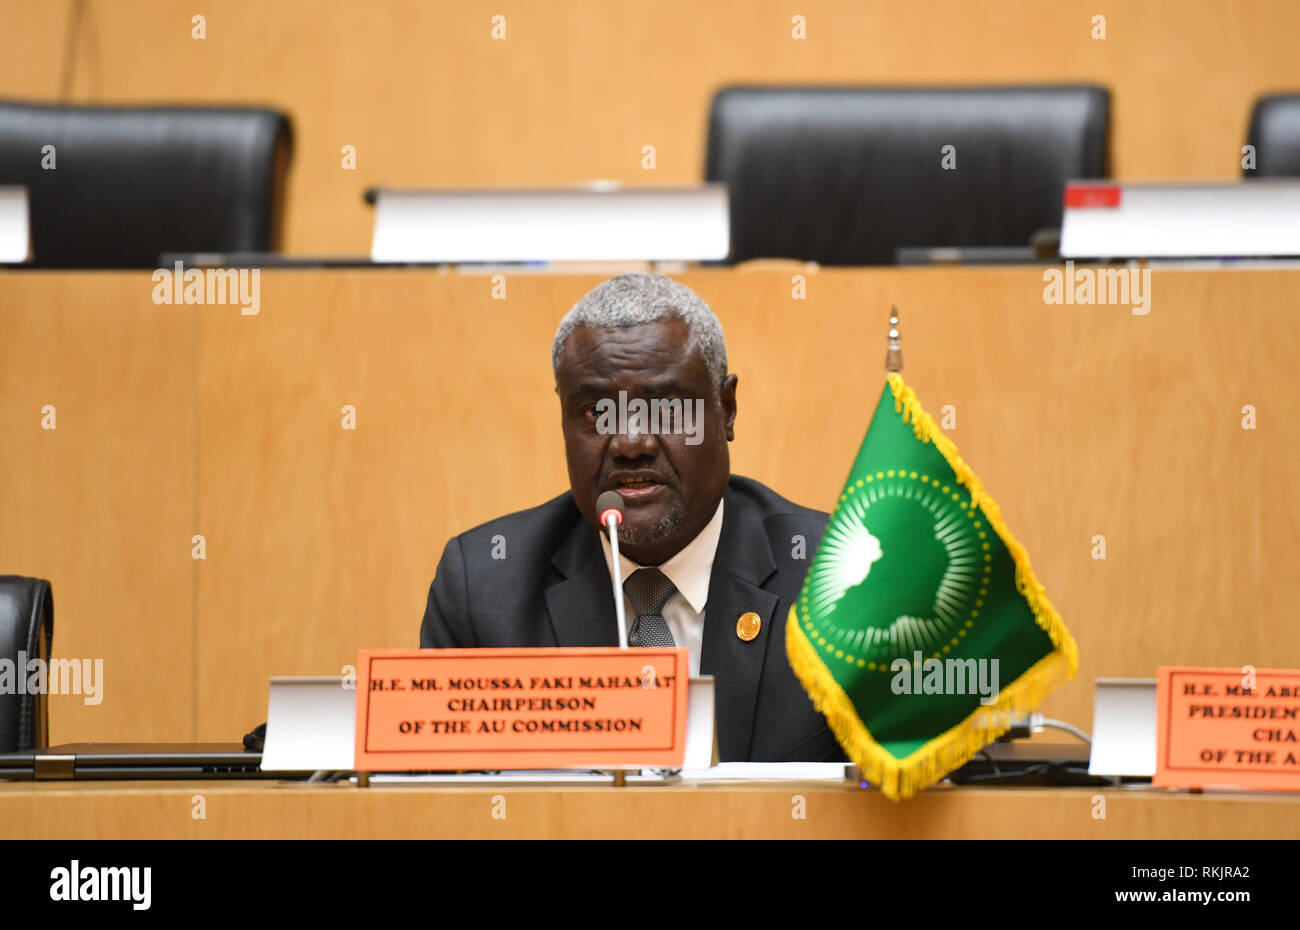 Addis Ababa, Ethiopia. 11th Feb, 2019. Chairperson of the African Union (AU) Commission Moussa Faki Mahamat speaks at the press conference after the 32nd AU summit at the AU headquarters in Addis Ababa, Ethiopia, Feb. 11, 2019. The two-day session concluded here Monday under the theme 'Refugees, Returnees, and Internally Displaced Persons: Towards Durable Solutions to Forced Displacement in Africa.' Credit: Li Yan/Xinhua/Alamy Live News Stock Photo